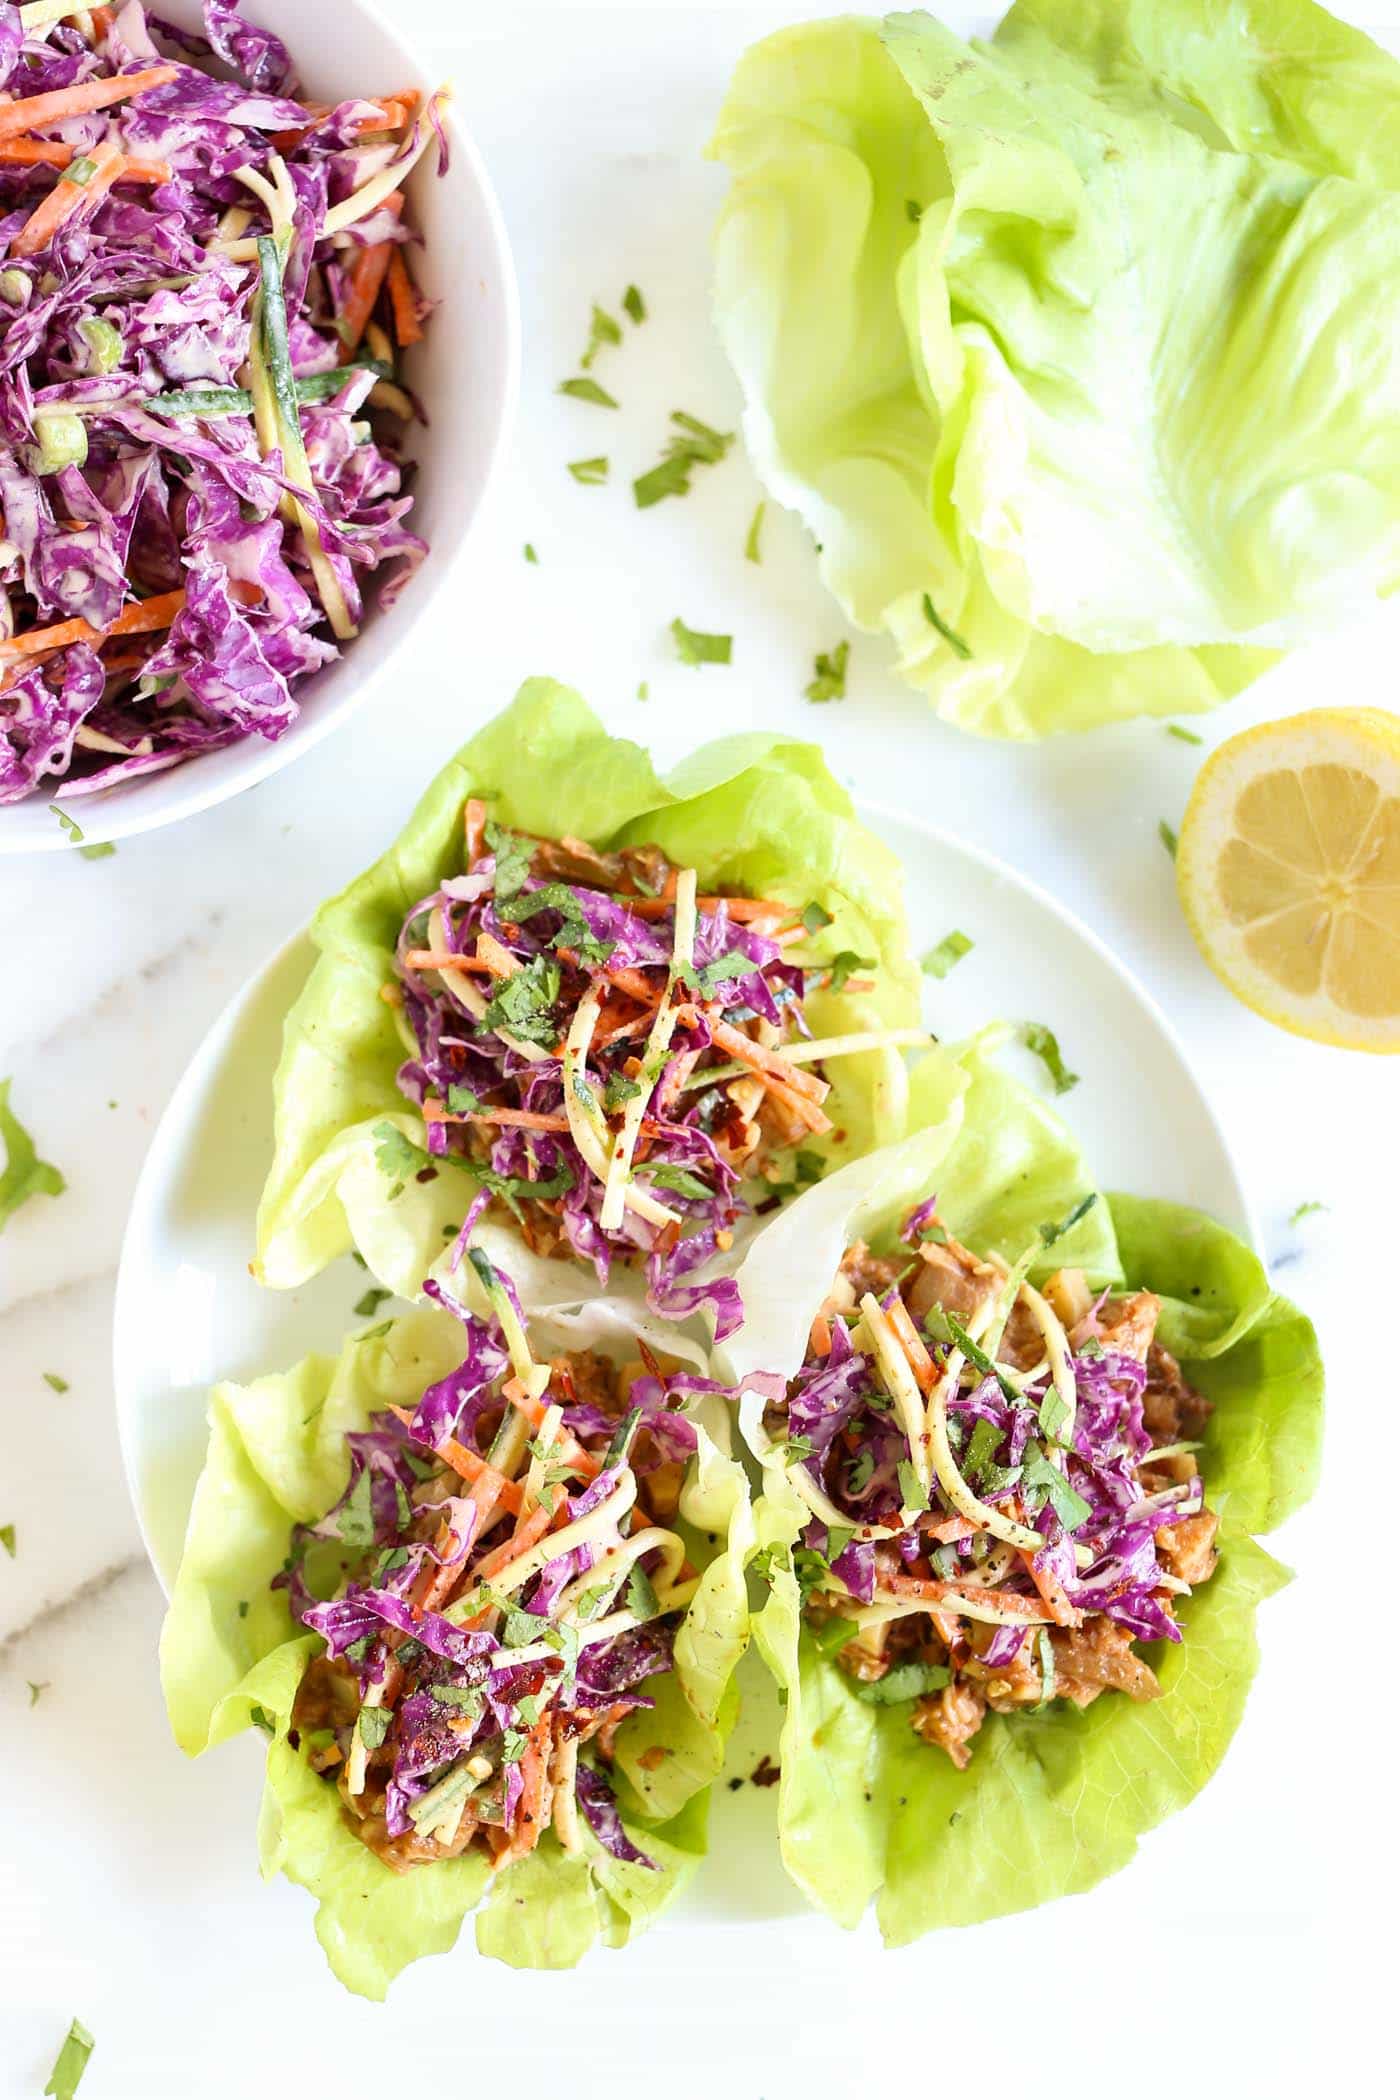 BBQ Pulled Pork Lettuce Wraps that are made with a VEGAN "pulled pork" recipe and topped with a maple coleslaw!